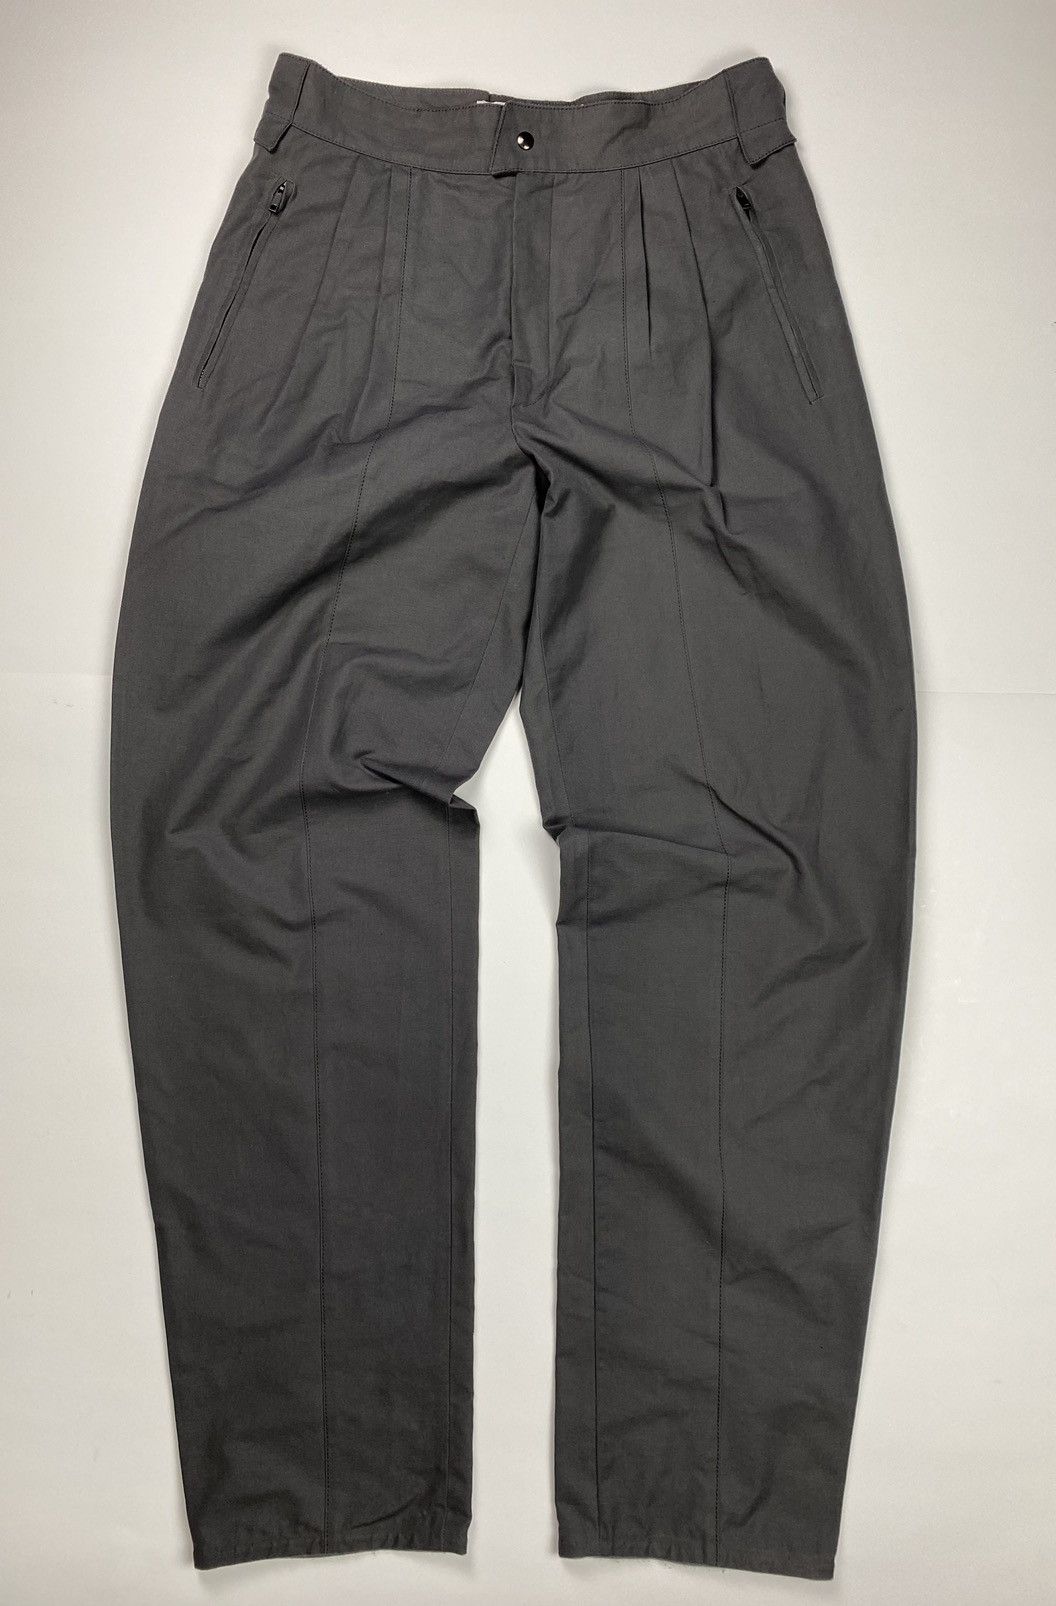 Claude Montana Vintage Claude Montana Made In Italy Cotton Pants | Grailed